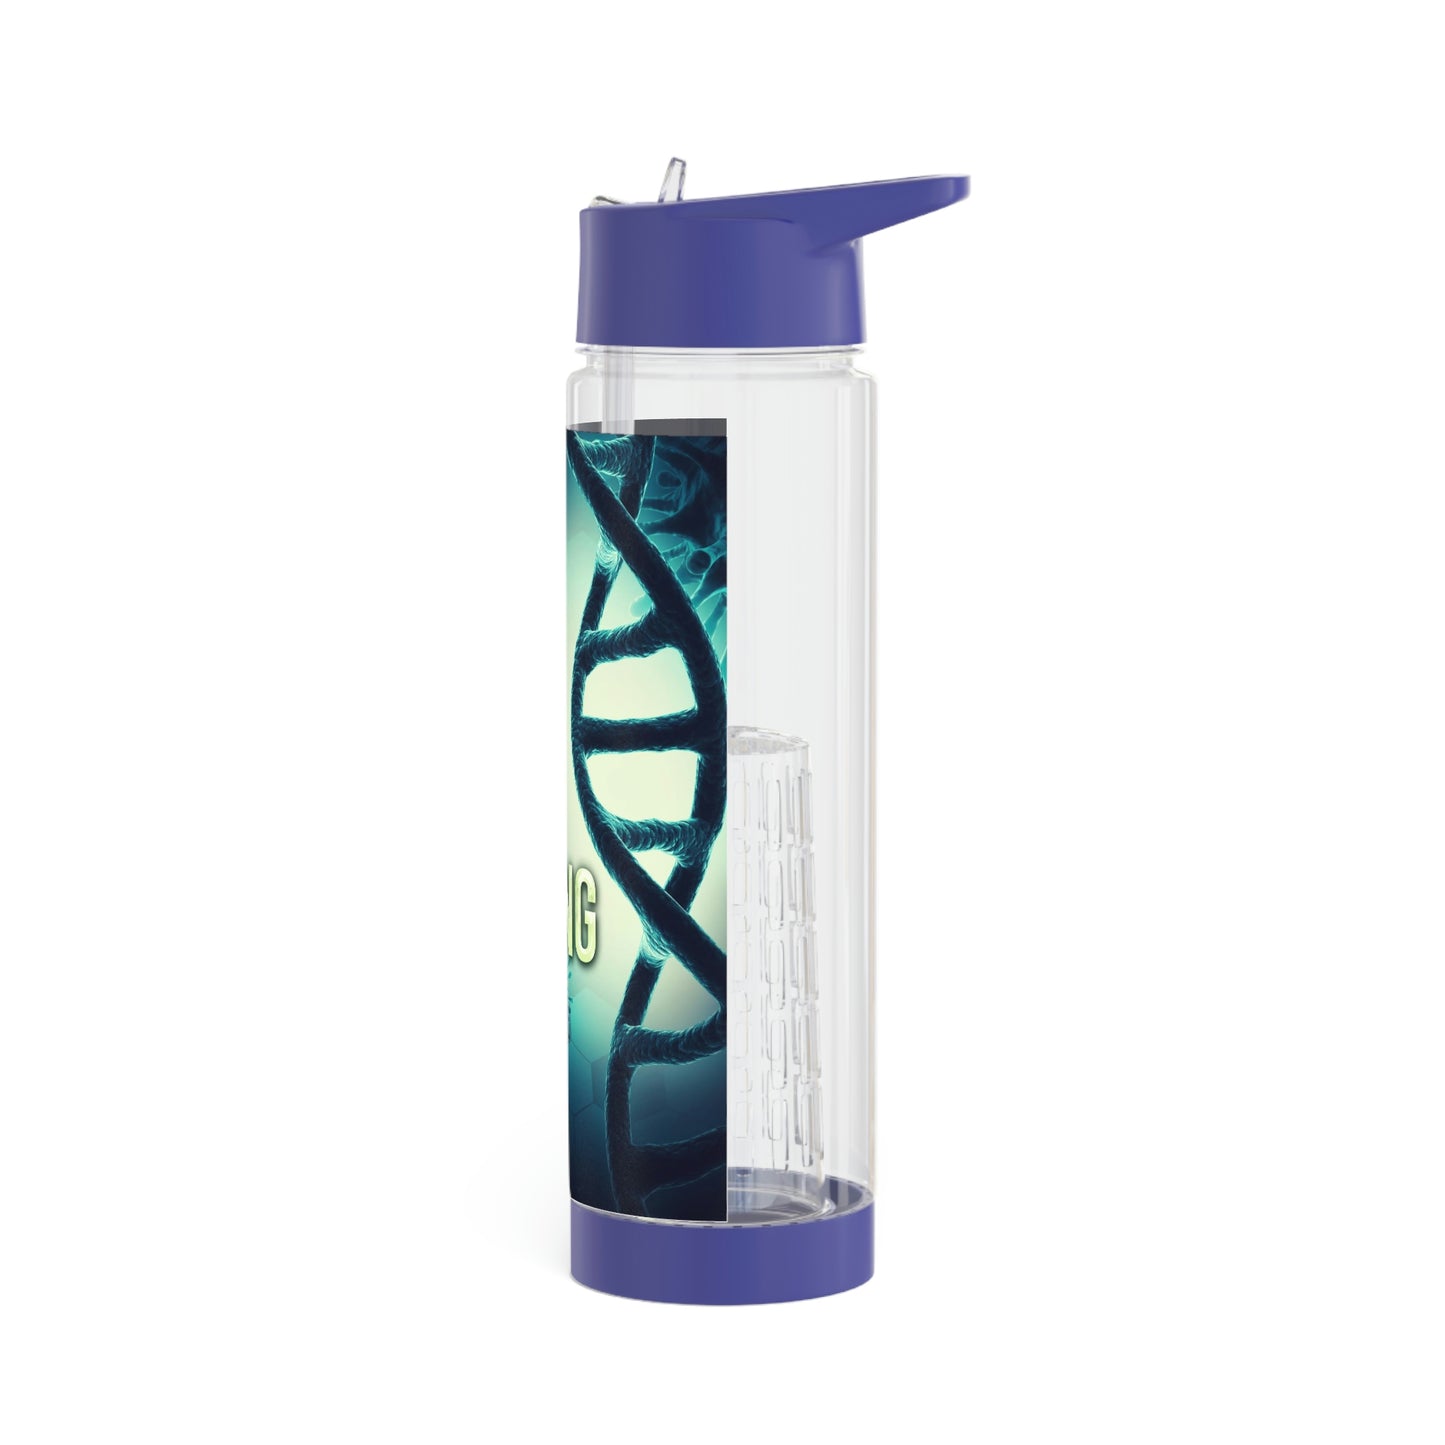 Chasing The Wind - Infuser Water Bottle